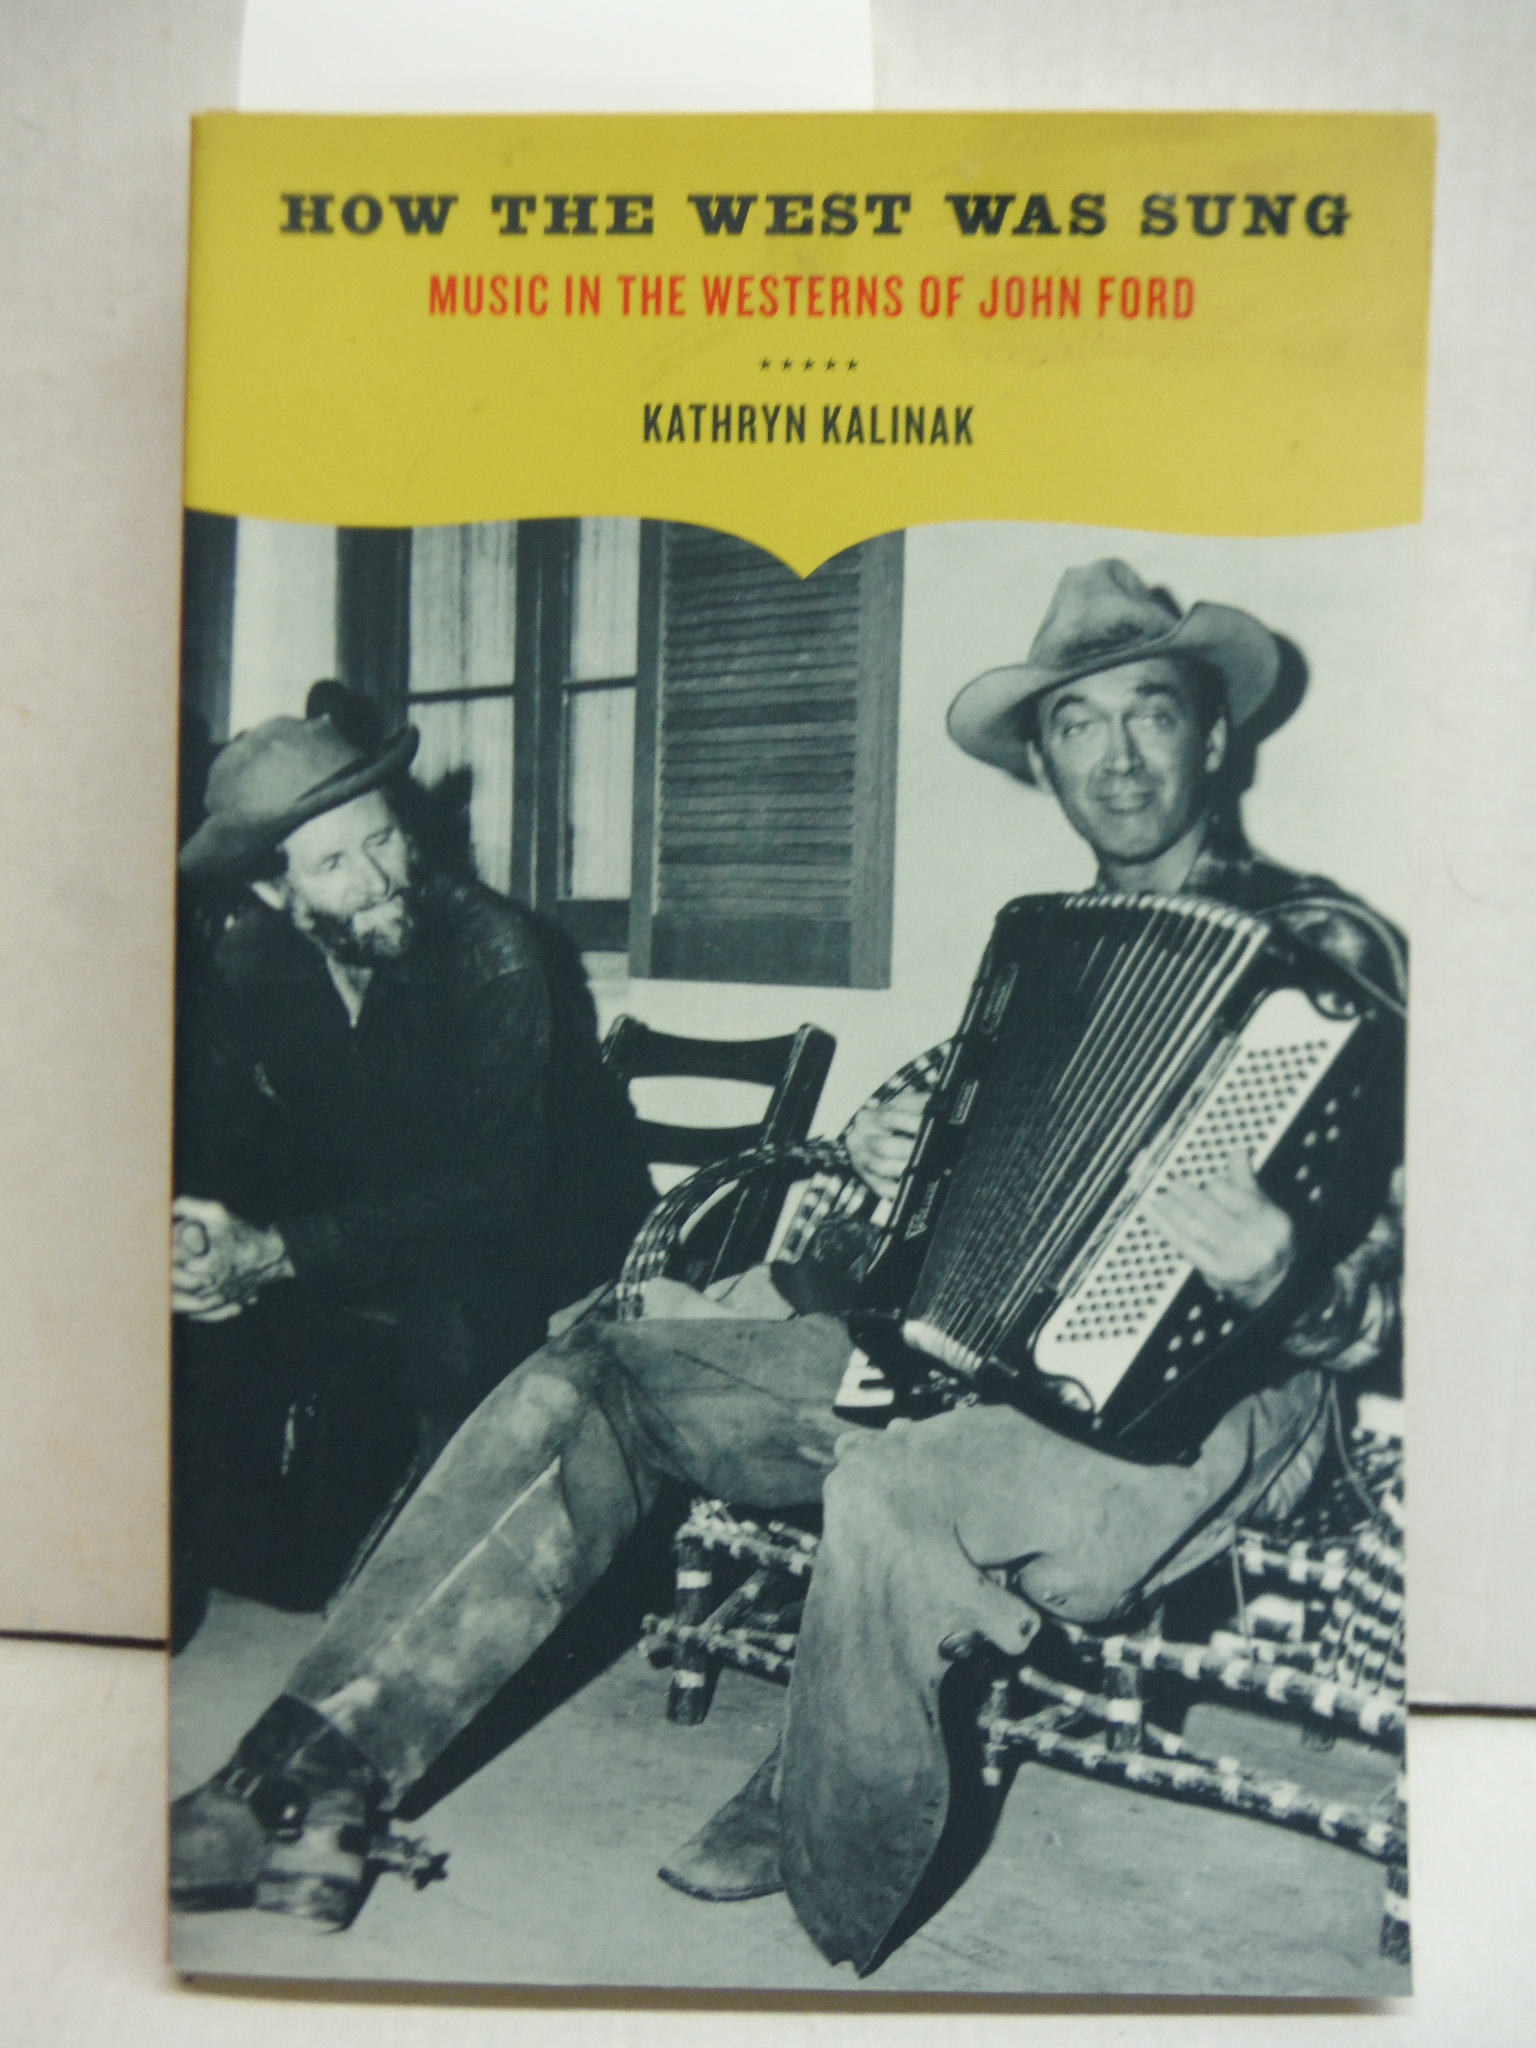 How the West Was Sung: Music in the Westerns of John Ford